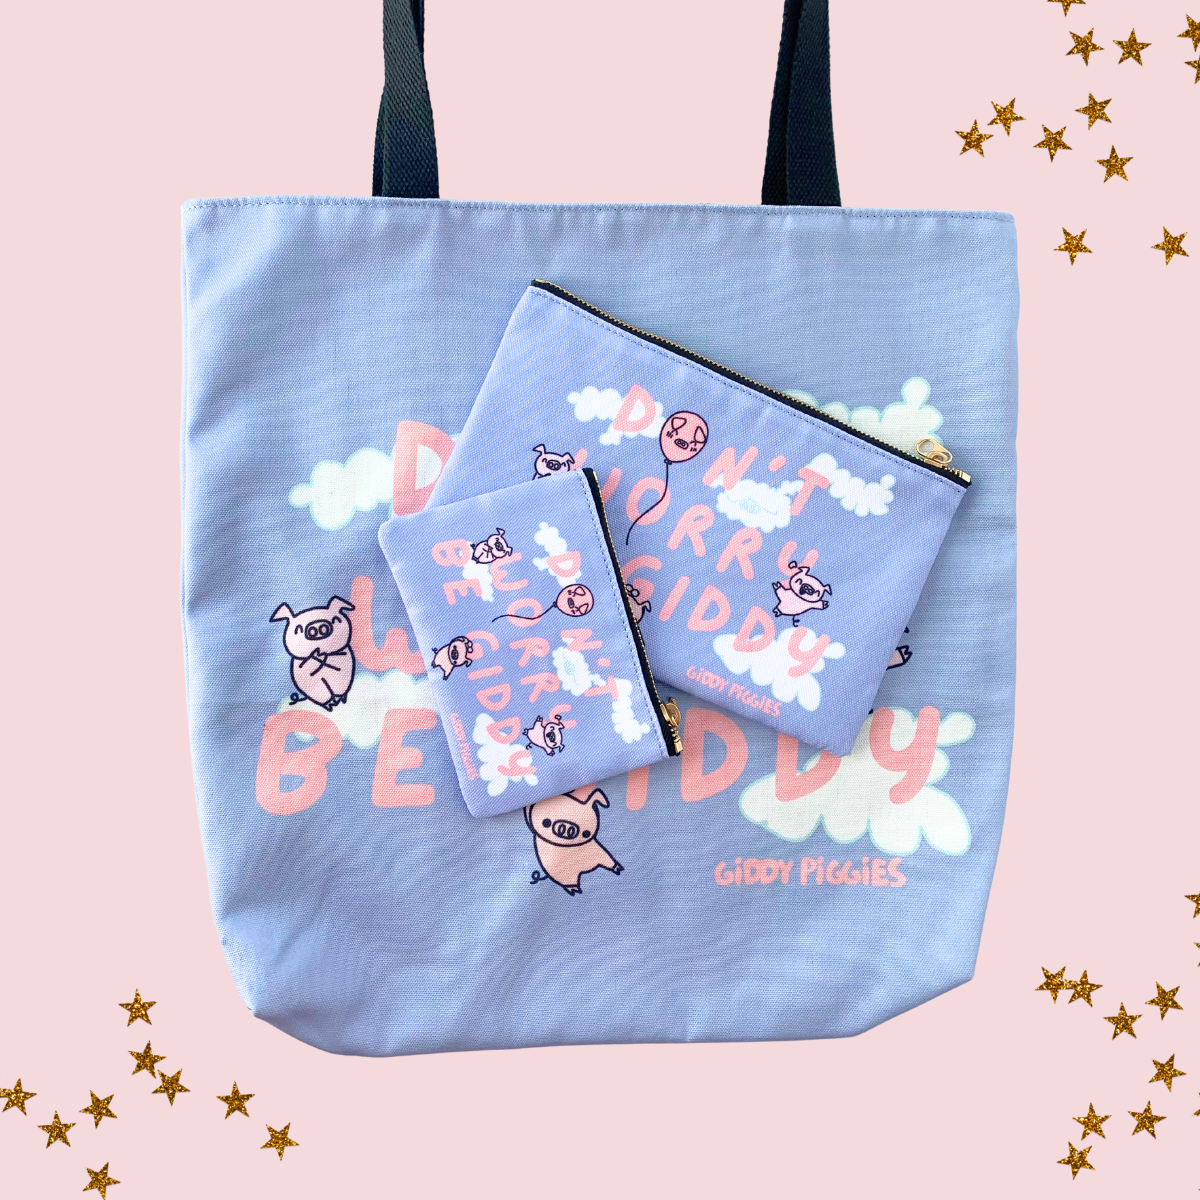 Don't Worry Be Giddy Tote Bag and Zipper Pouch Set